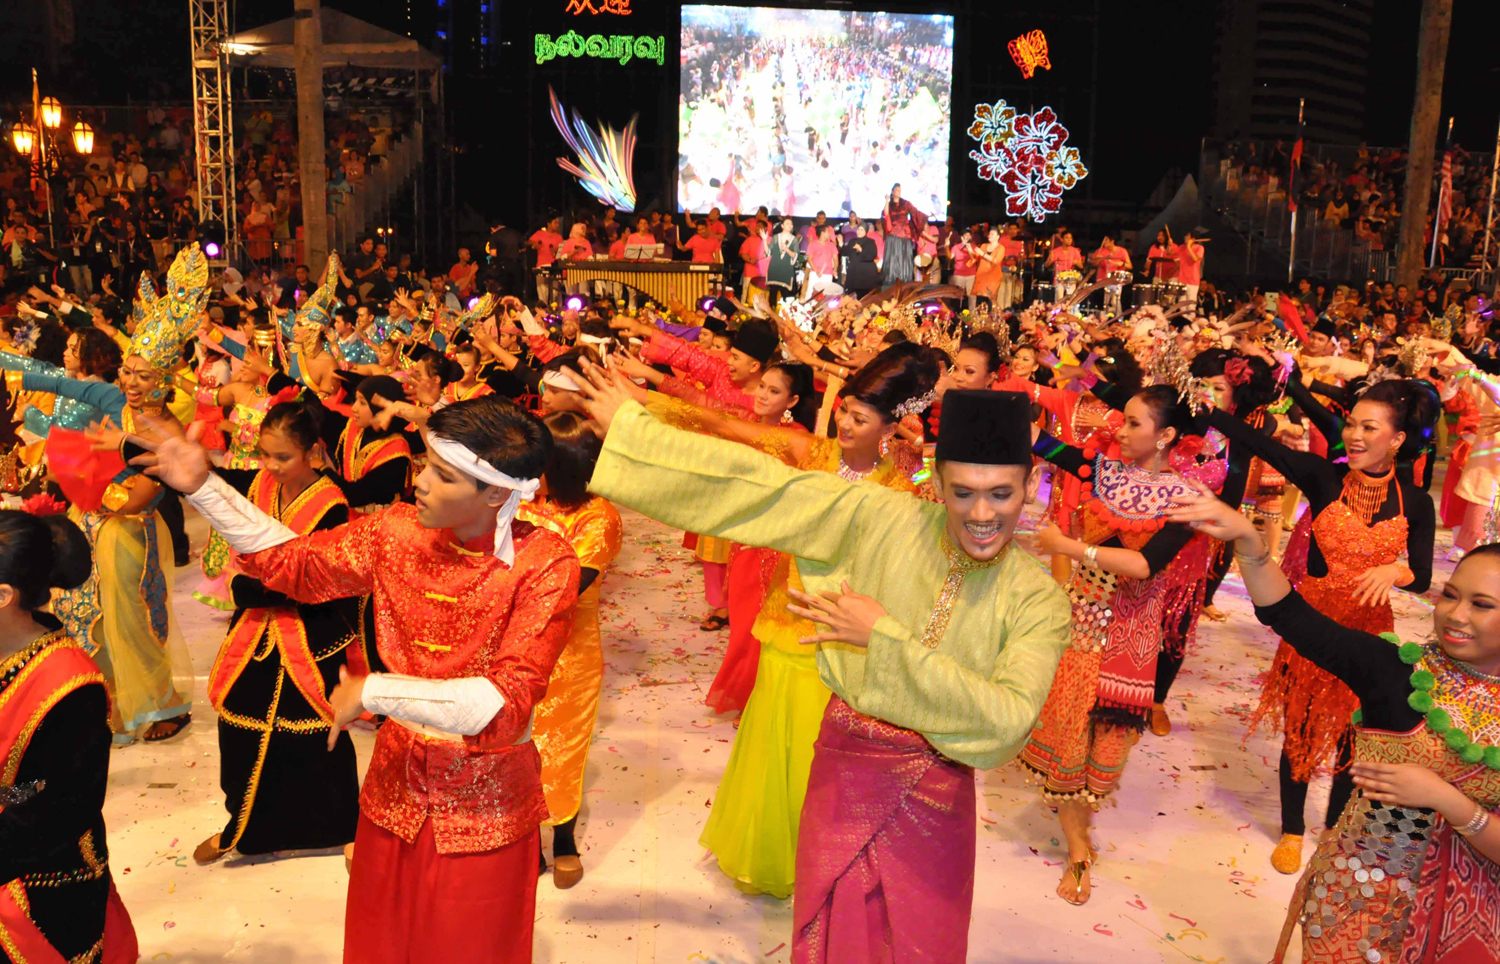 The variety of traditional Malay dancing had been an intriguing activity that attracted many tourists from around the globe